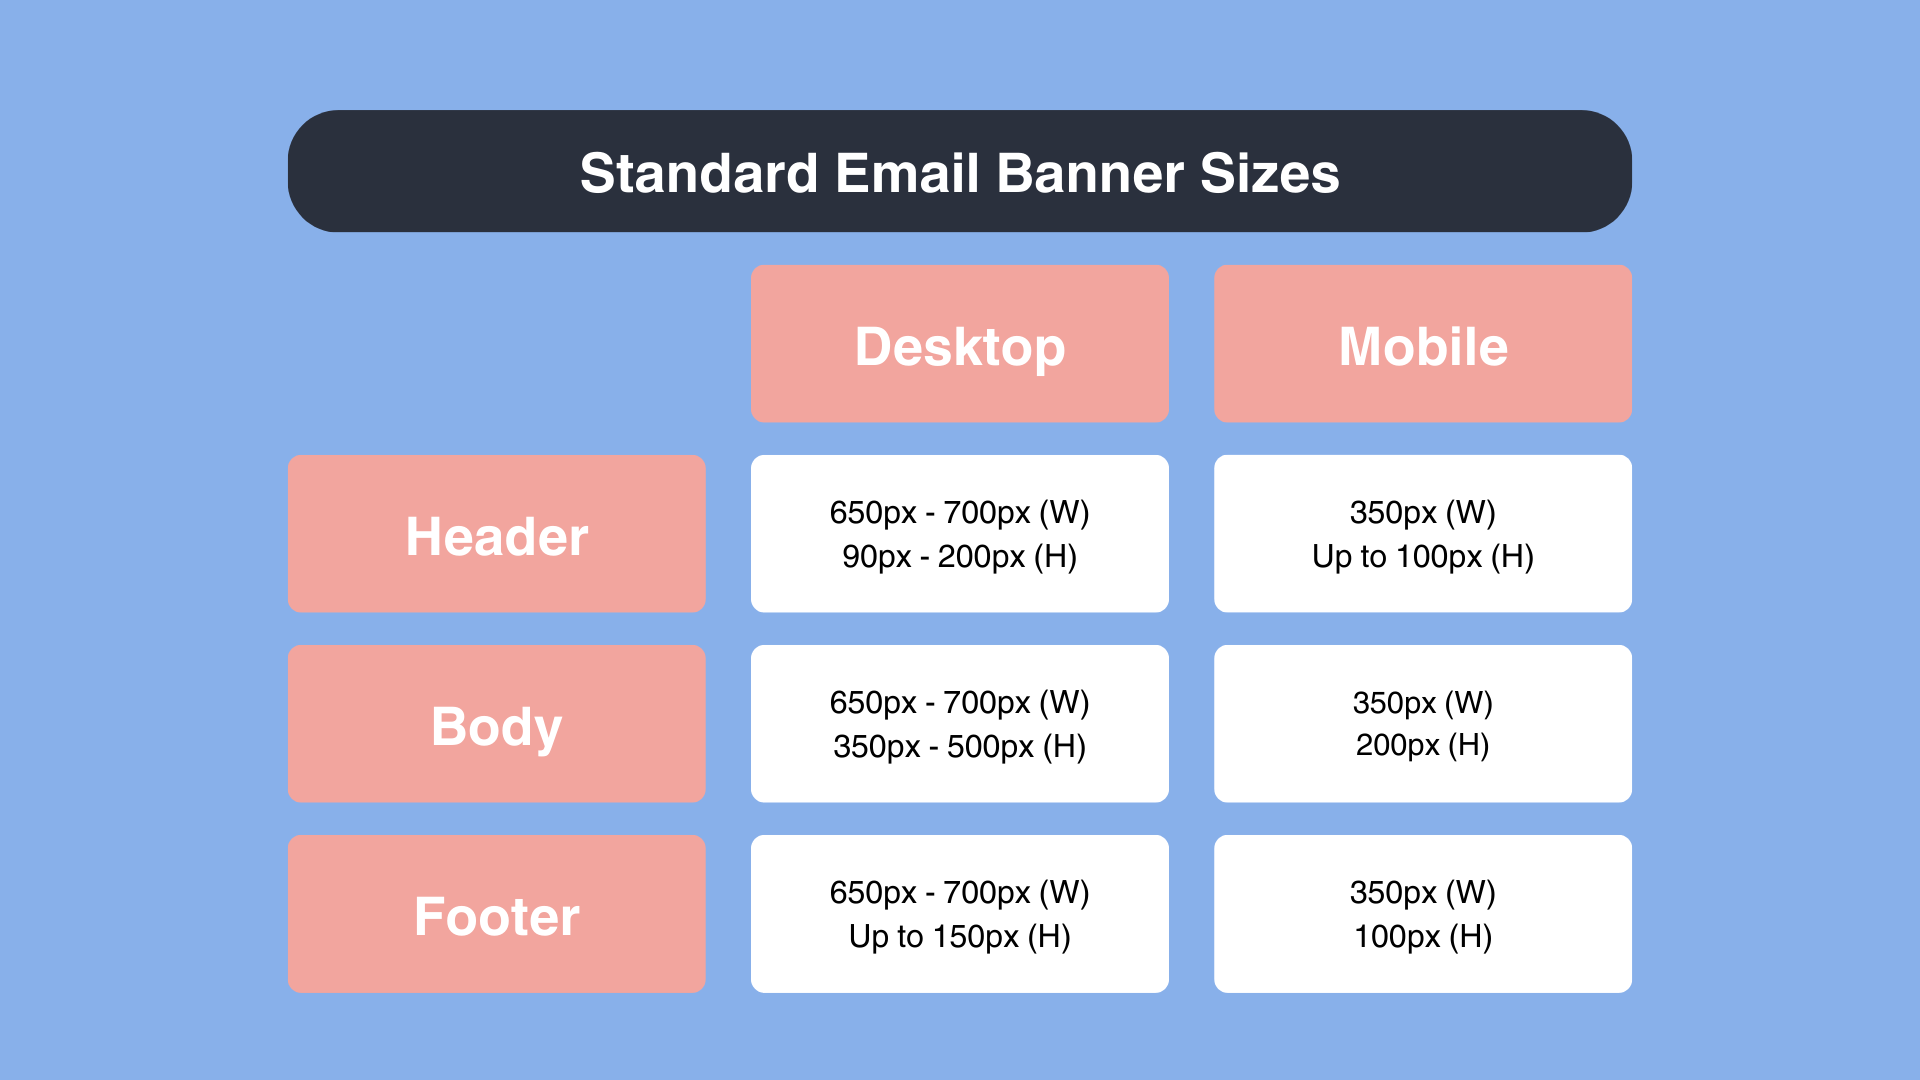 Standard email banner ad sizes